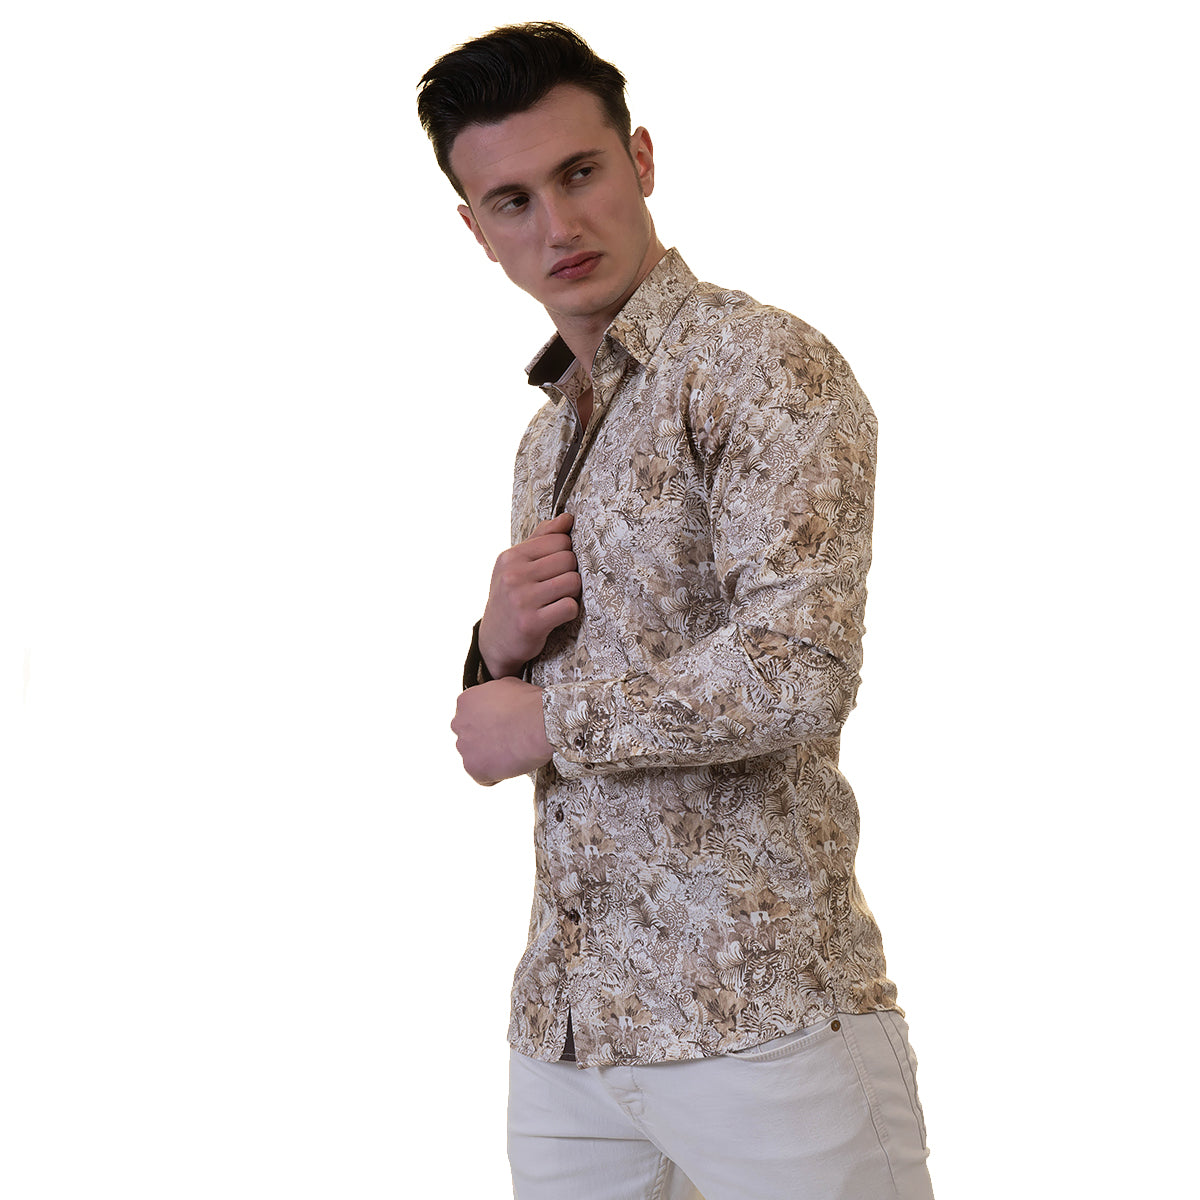 Beige Mens Slim Fit Designer Dress Shirt - tailored Cotton Shirts for Work and Casual Wear